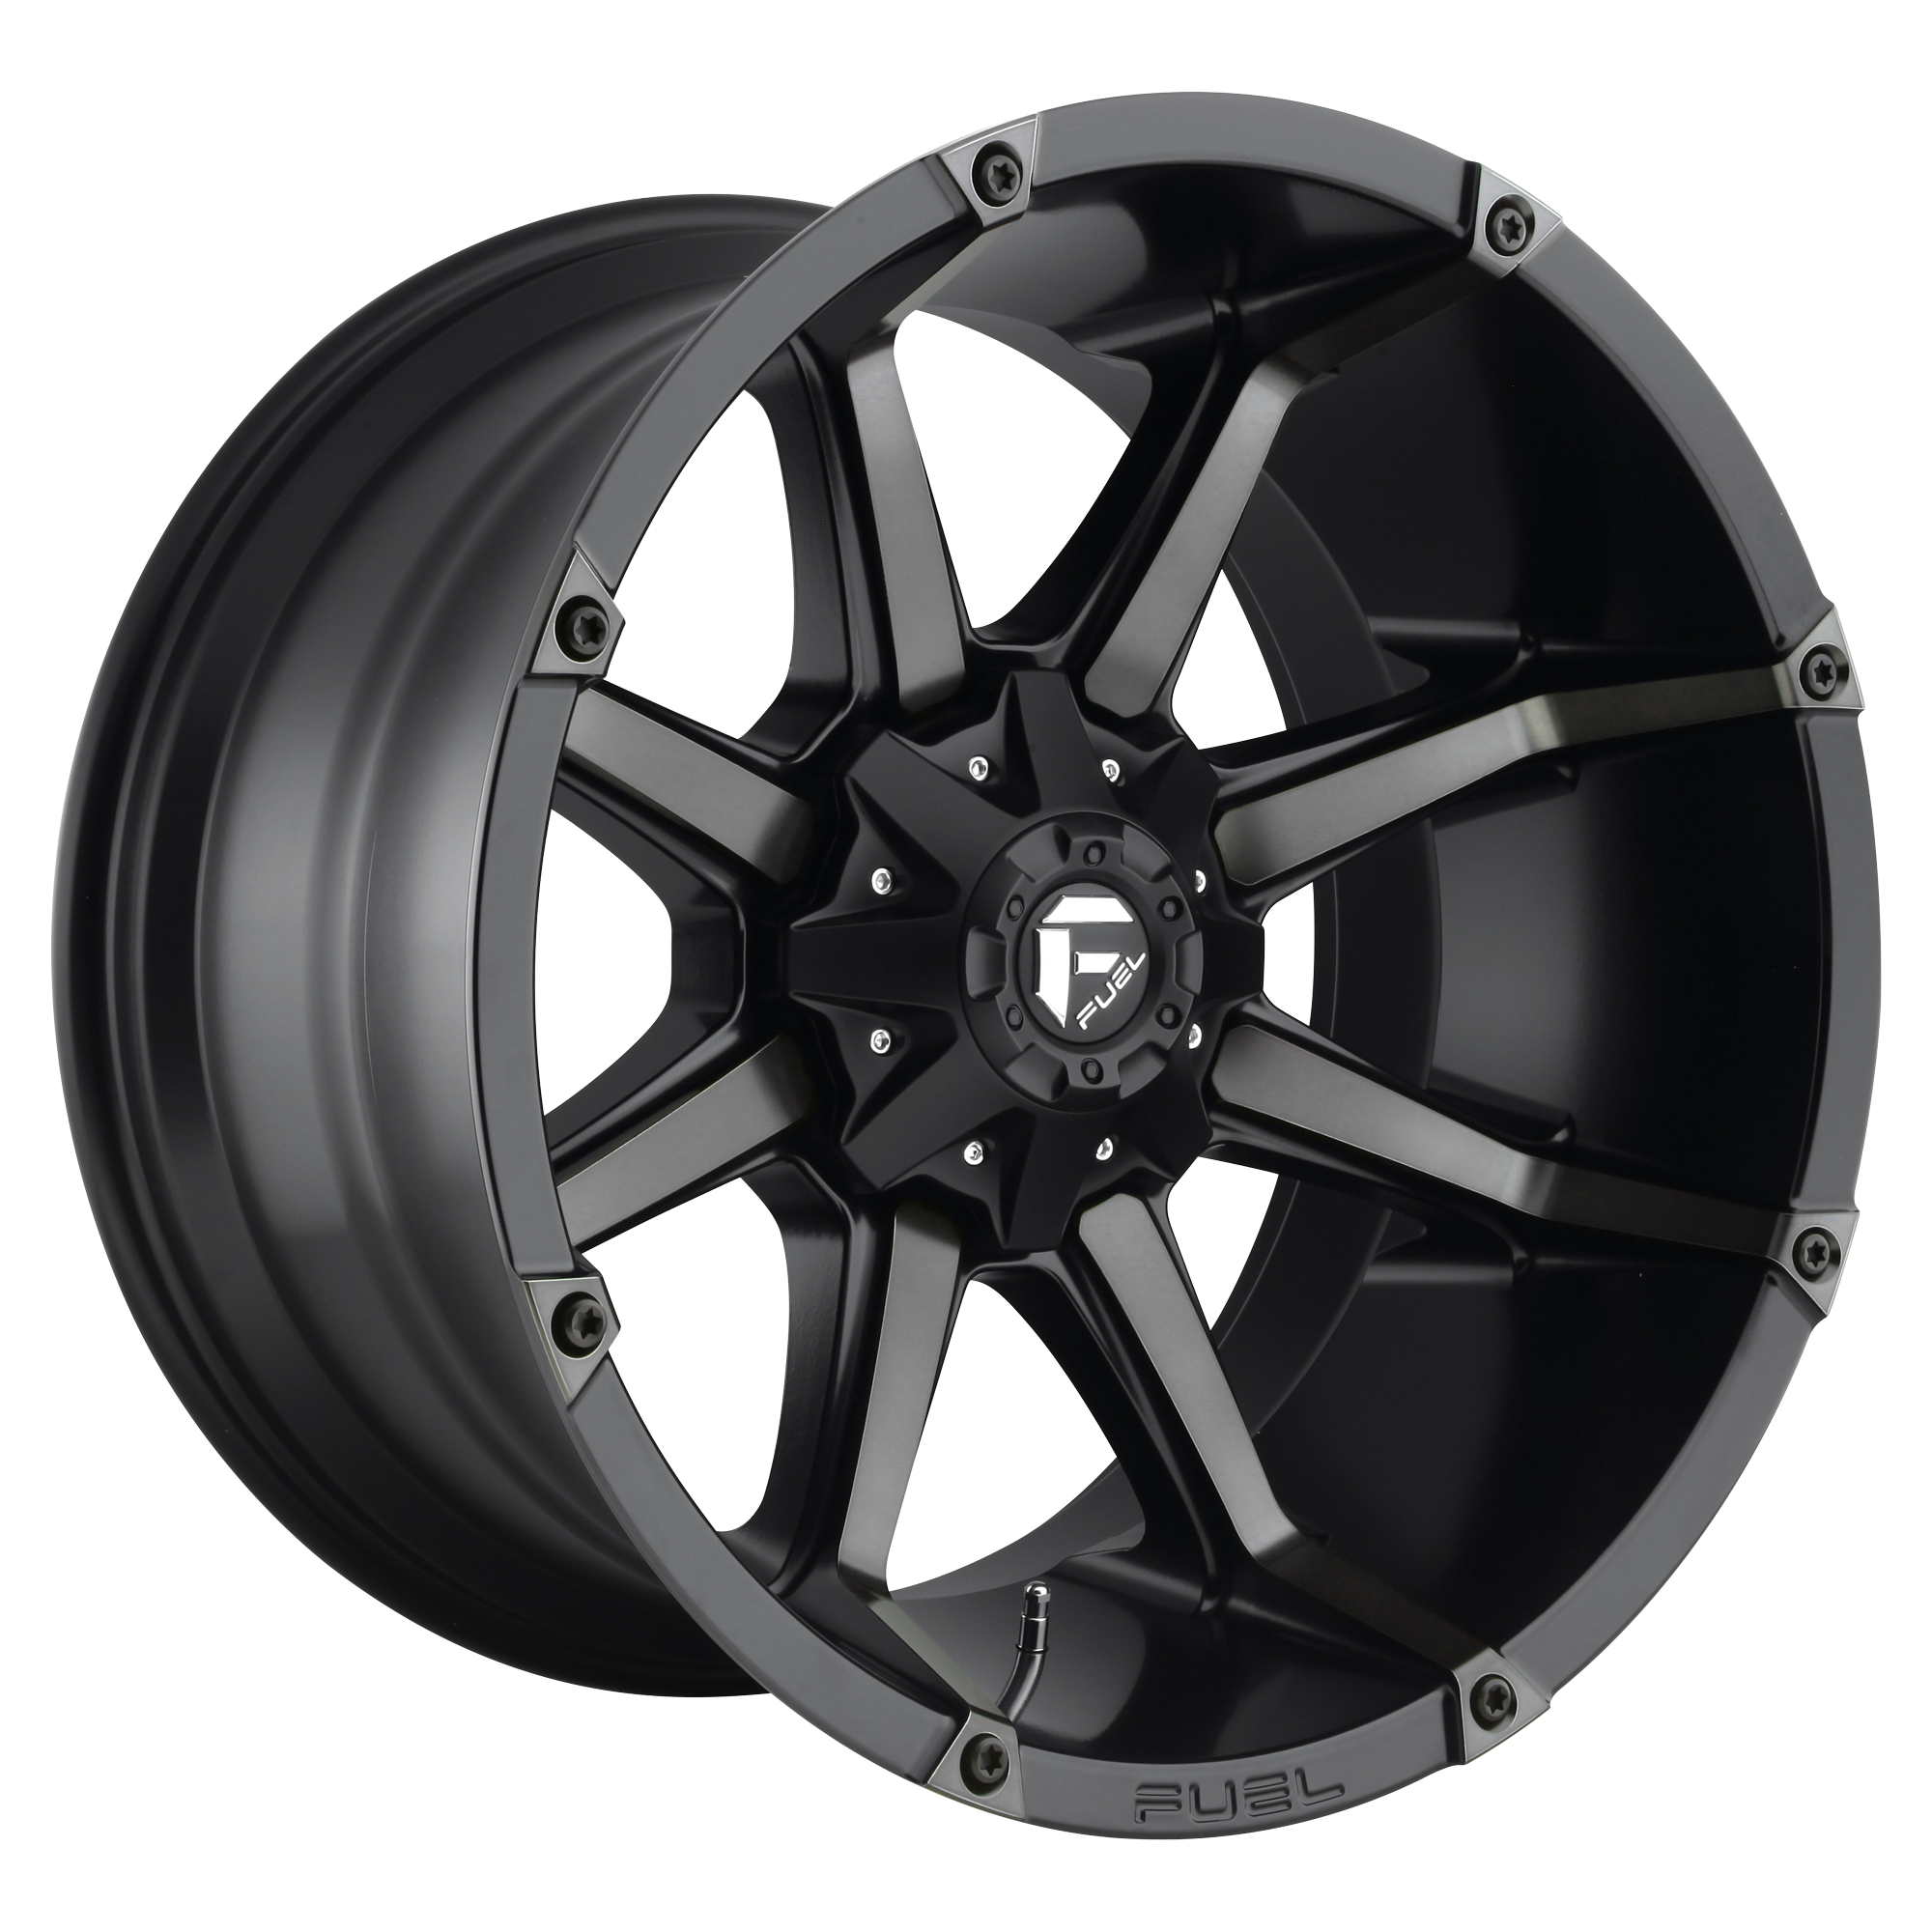 COUPLER 20x10 8x180.00 MATTE BLACK DOUBLE DARK TINT (-12 mm) - Tires and Engine Performance